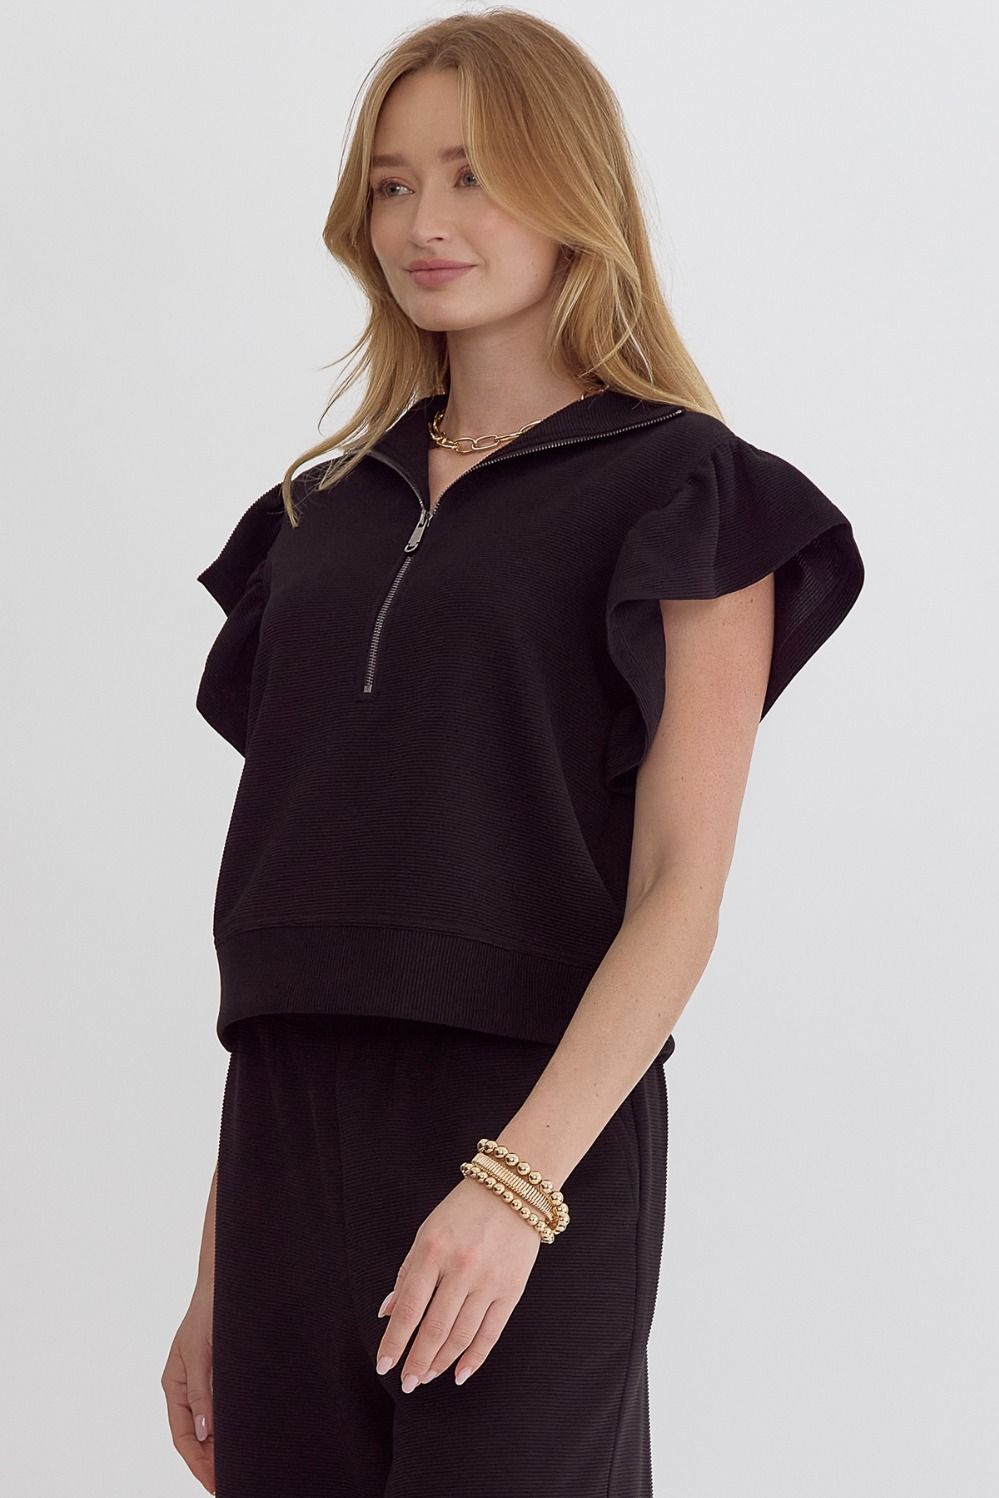 ENTRO INC Women's Top BLACK / S Textured Solid Ruffle Sleeve Top || David's Clothing T23793